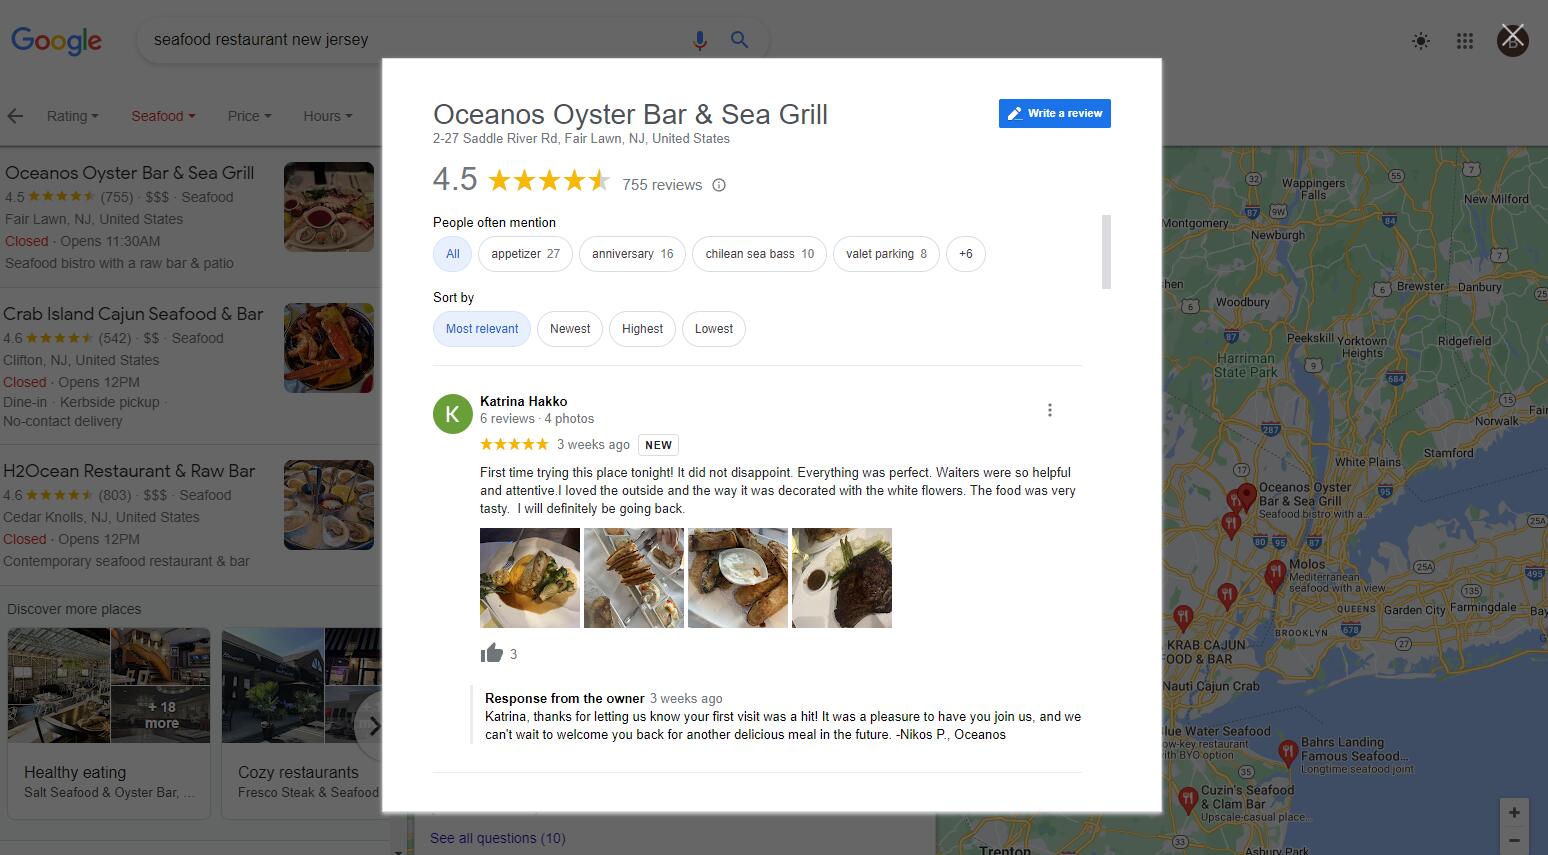 Seafood restaurant review on Google